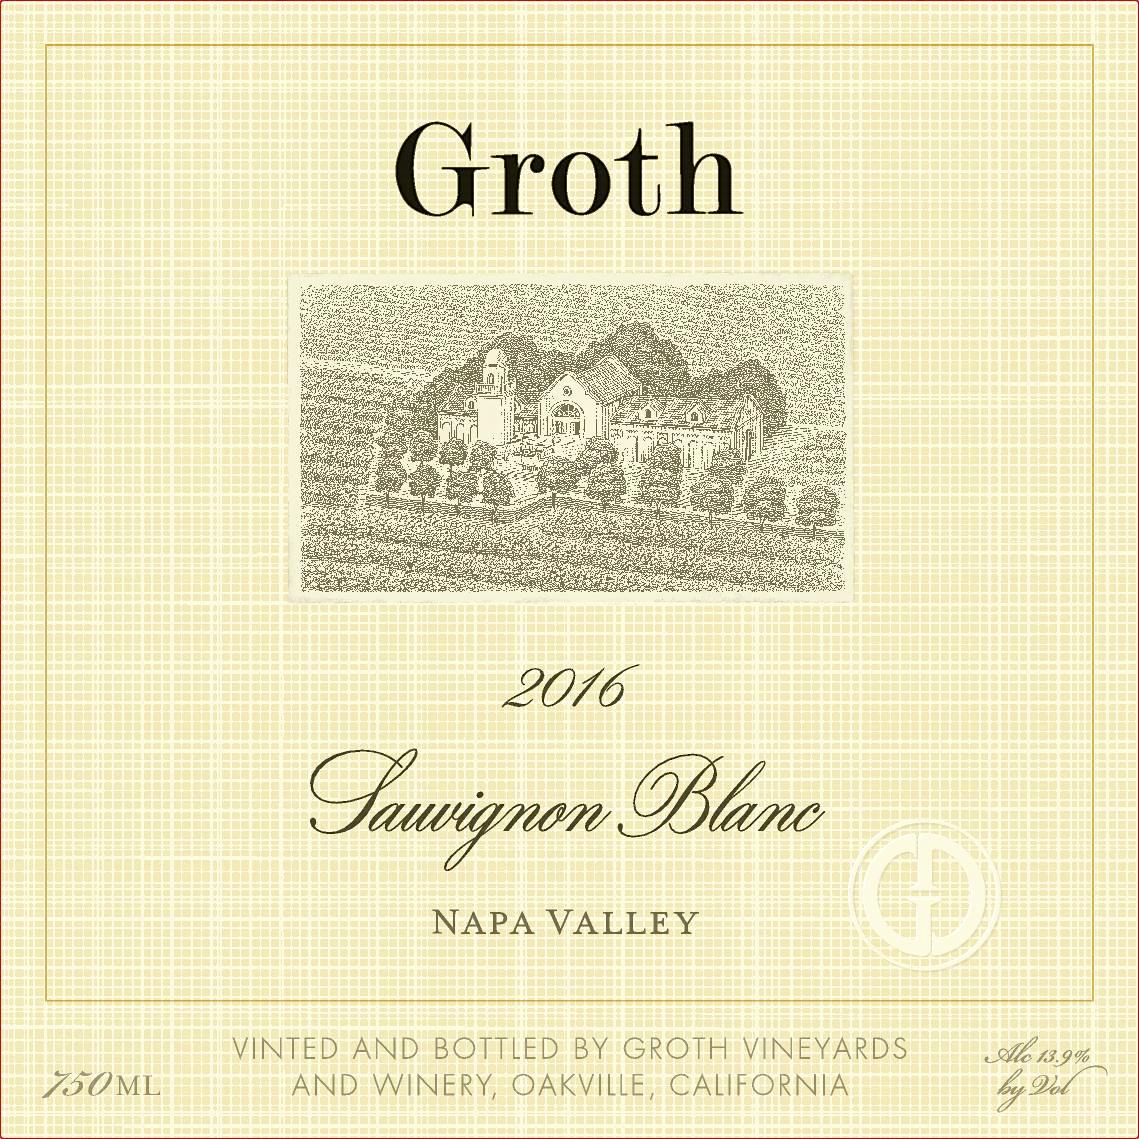 Label for Groth